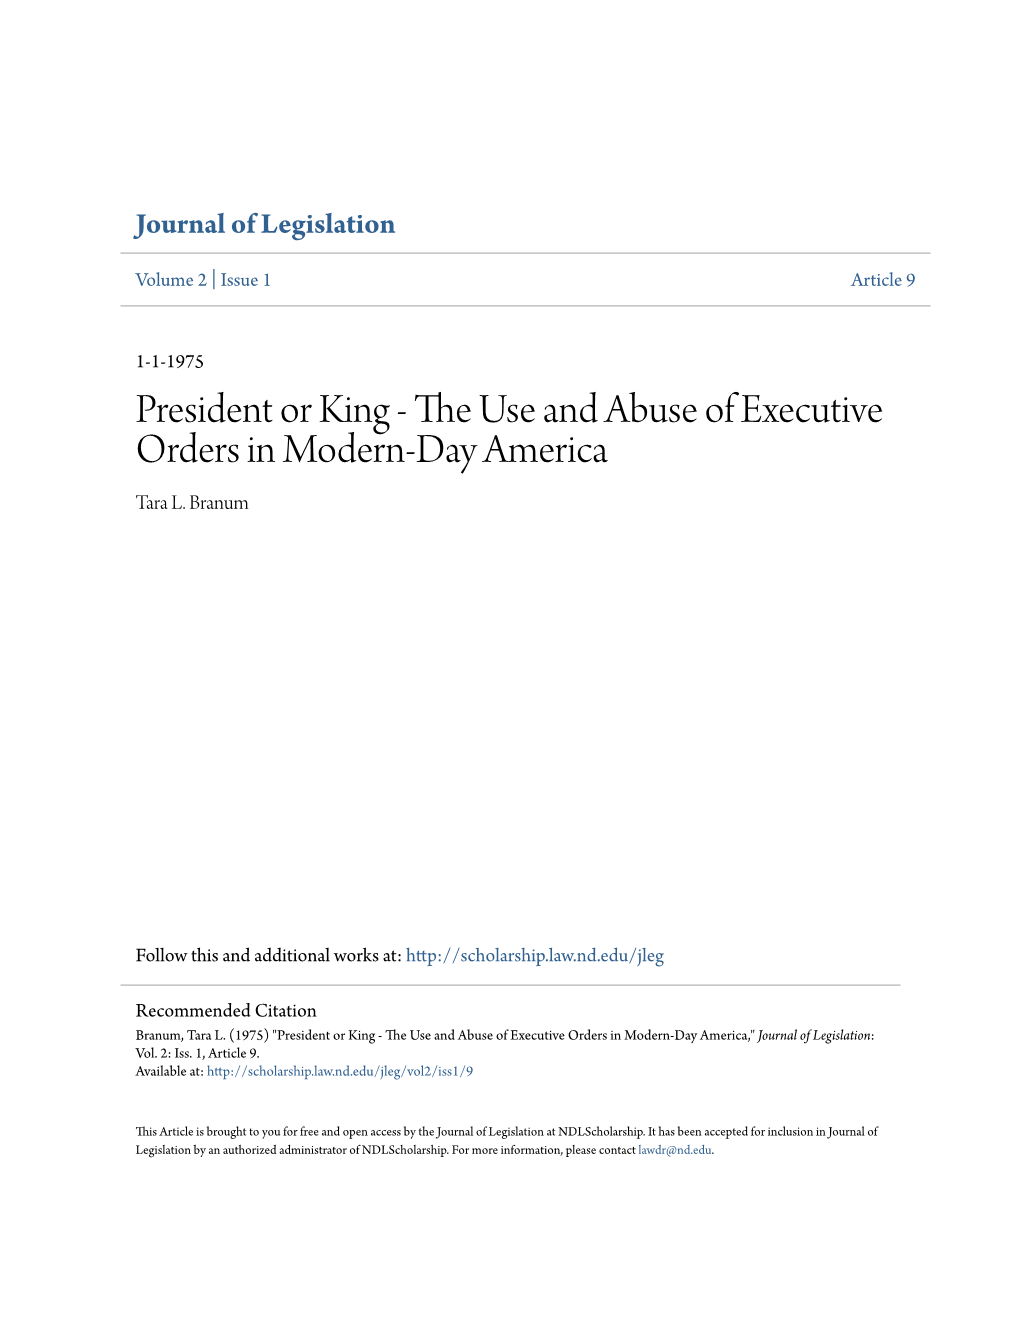 President Or King - the Seu and Abuse of Executive Orders in Modern-Day America Tara L